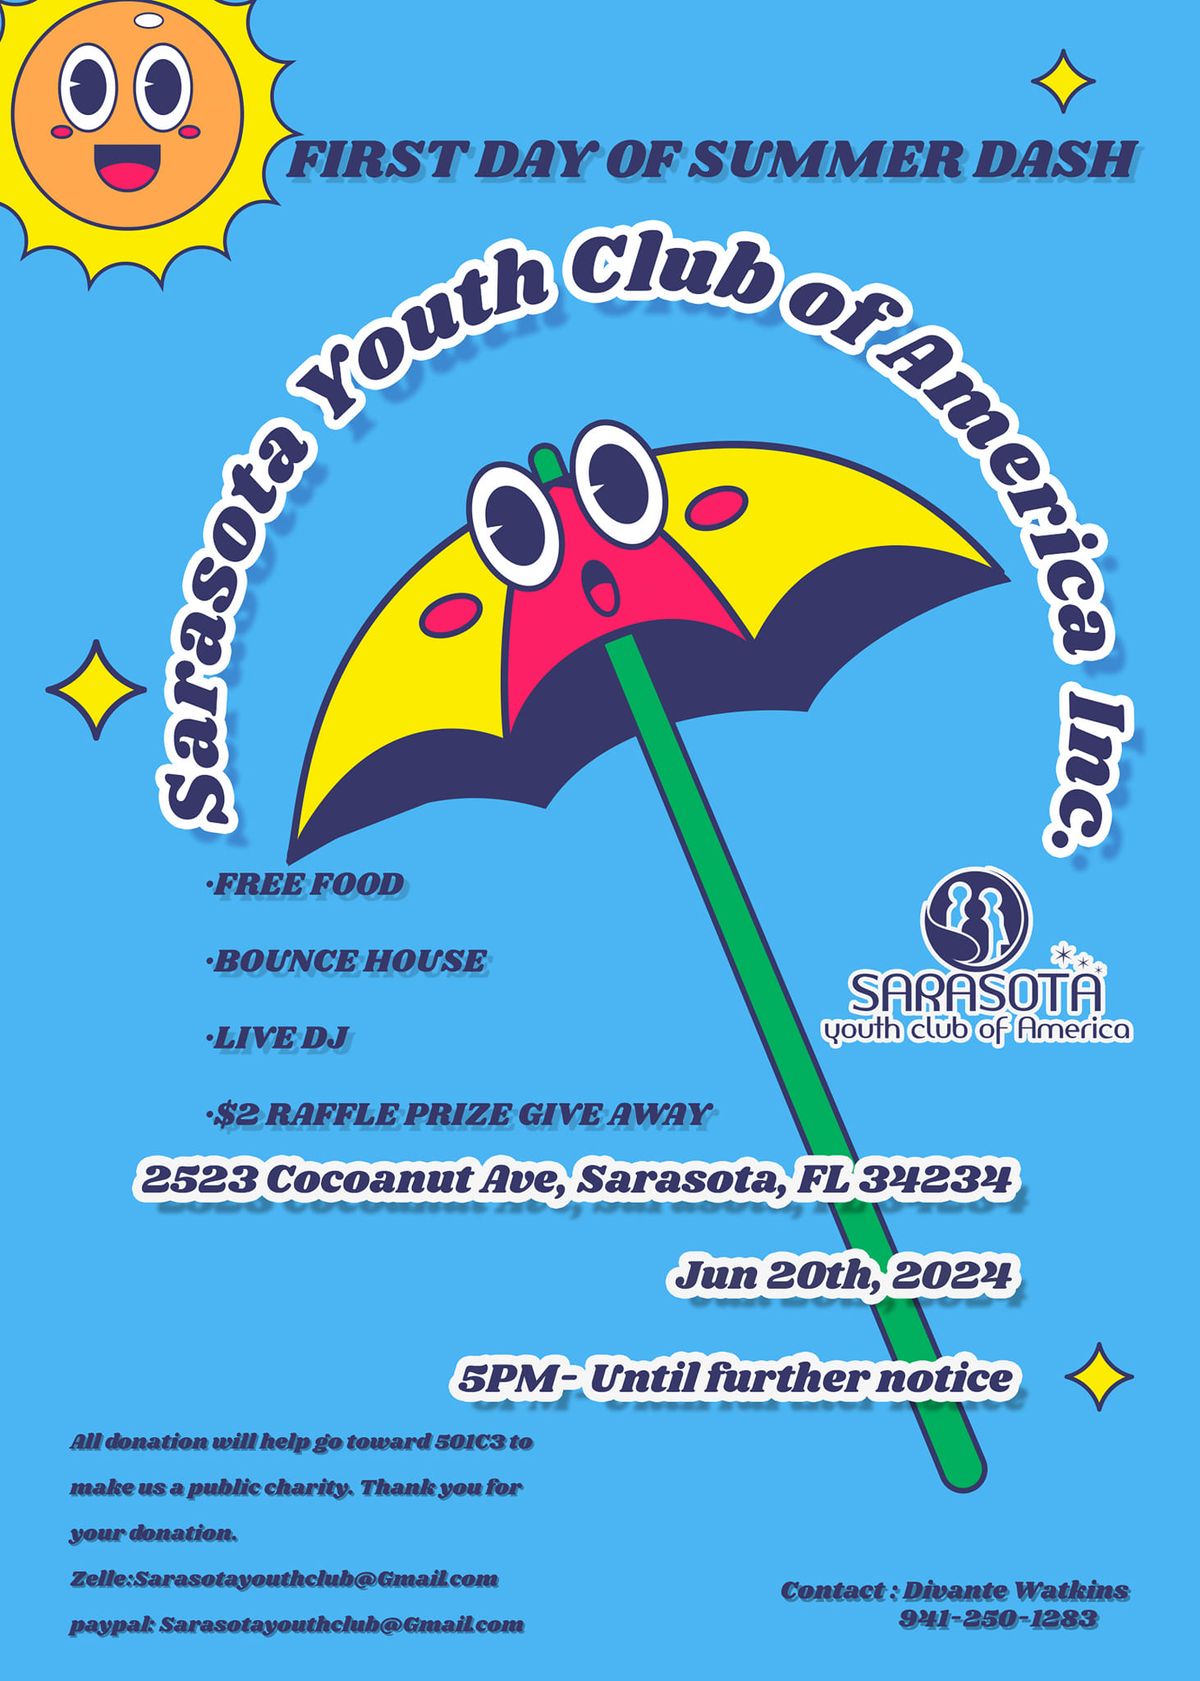 FIRST DAY OF SUMMER BASH PART #1 PRESENTED BY SARASOTA YOUTH CLUB OF AMERICA INC